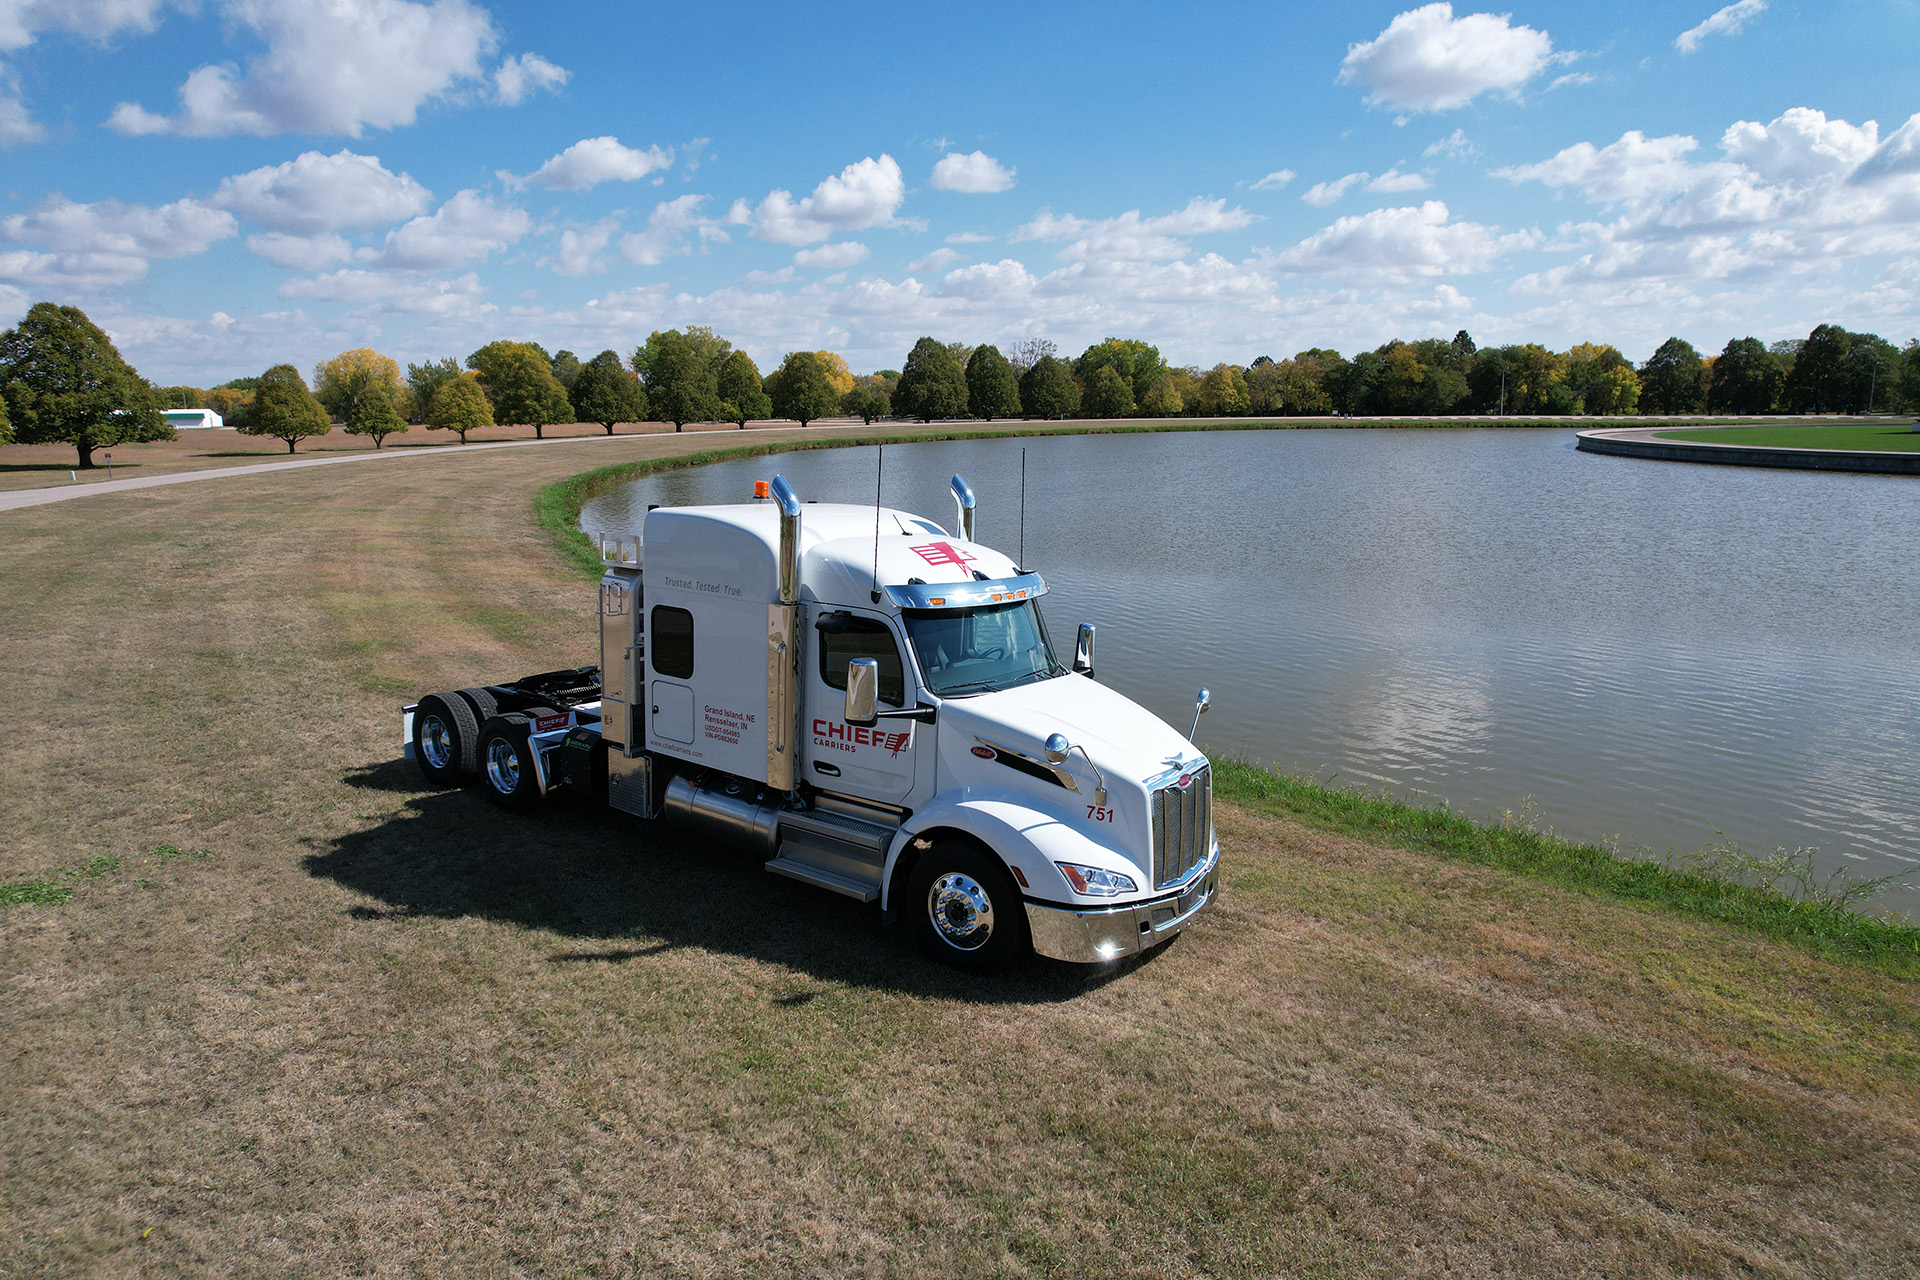 Chief Carriers semi cab next to an open body of water; captured by a drone